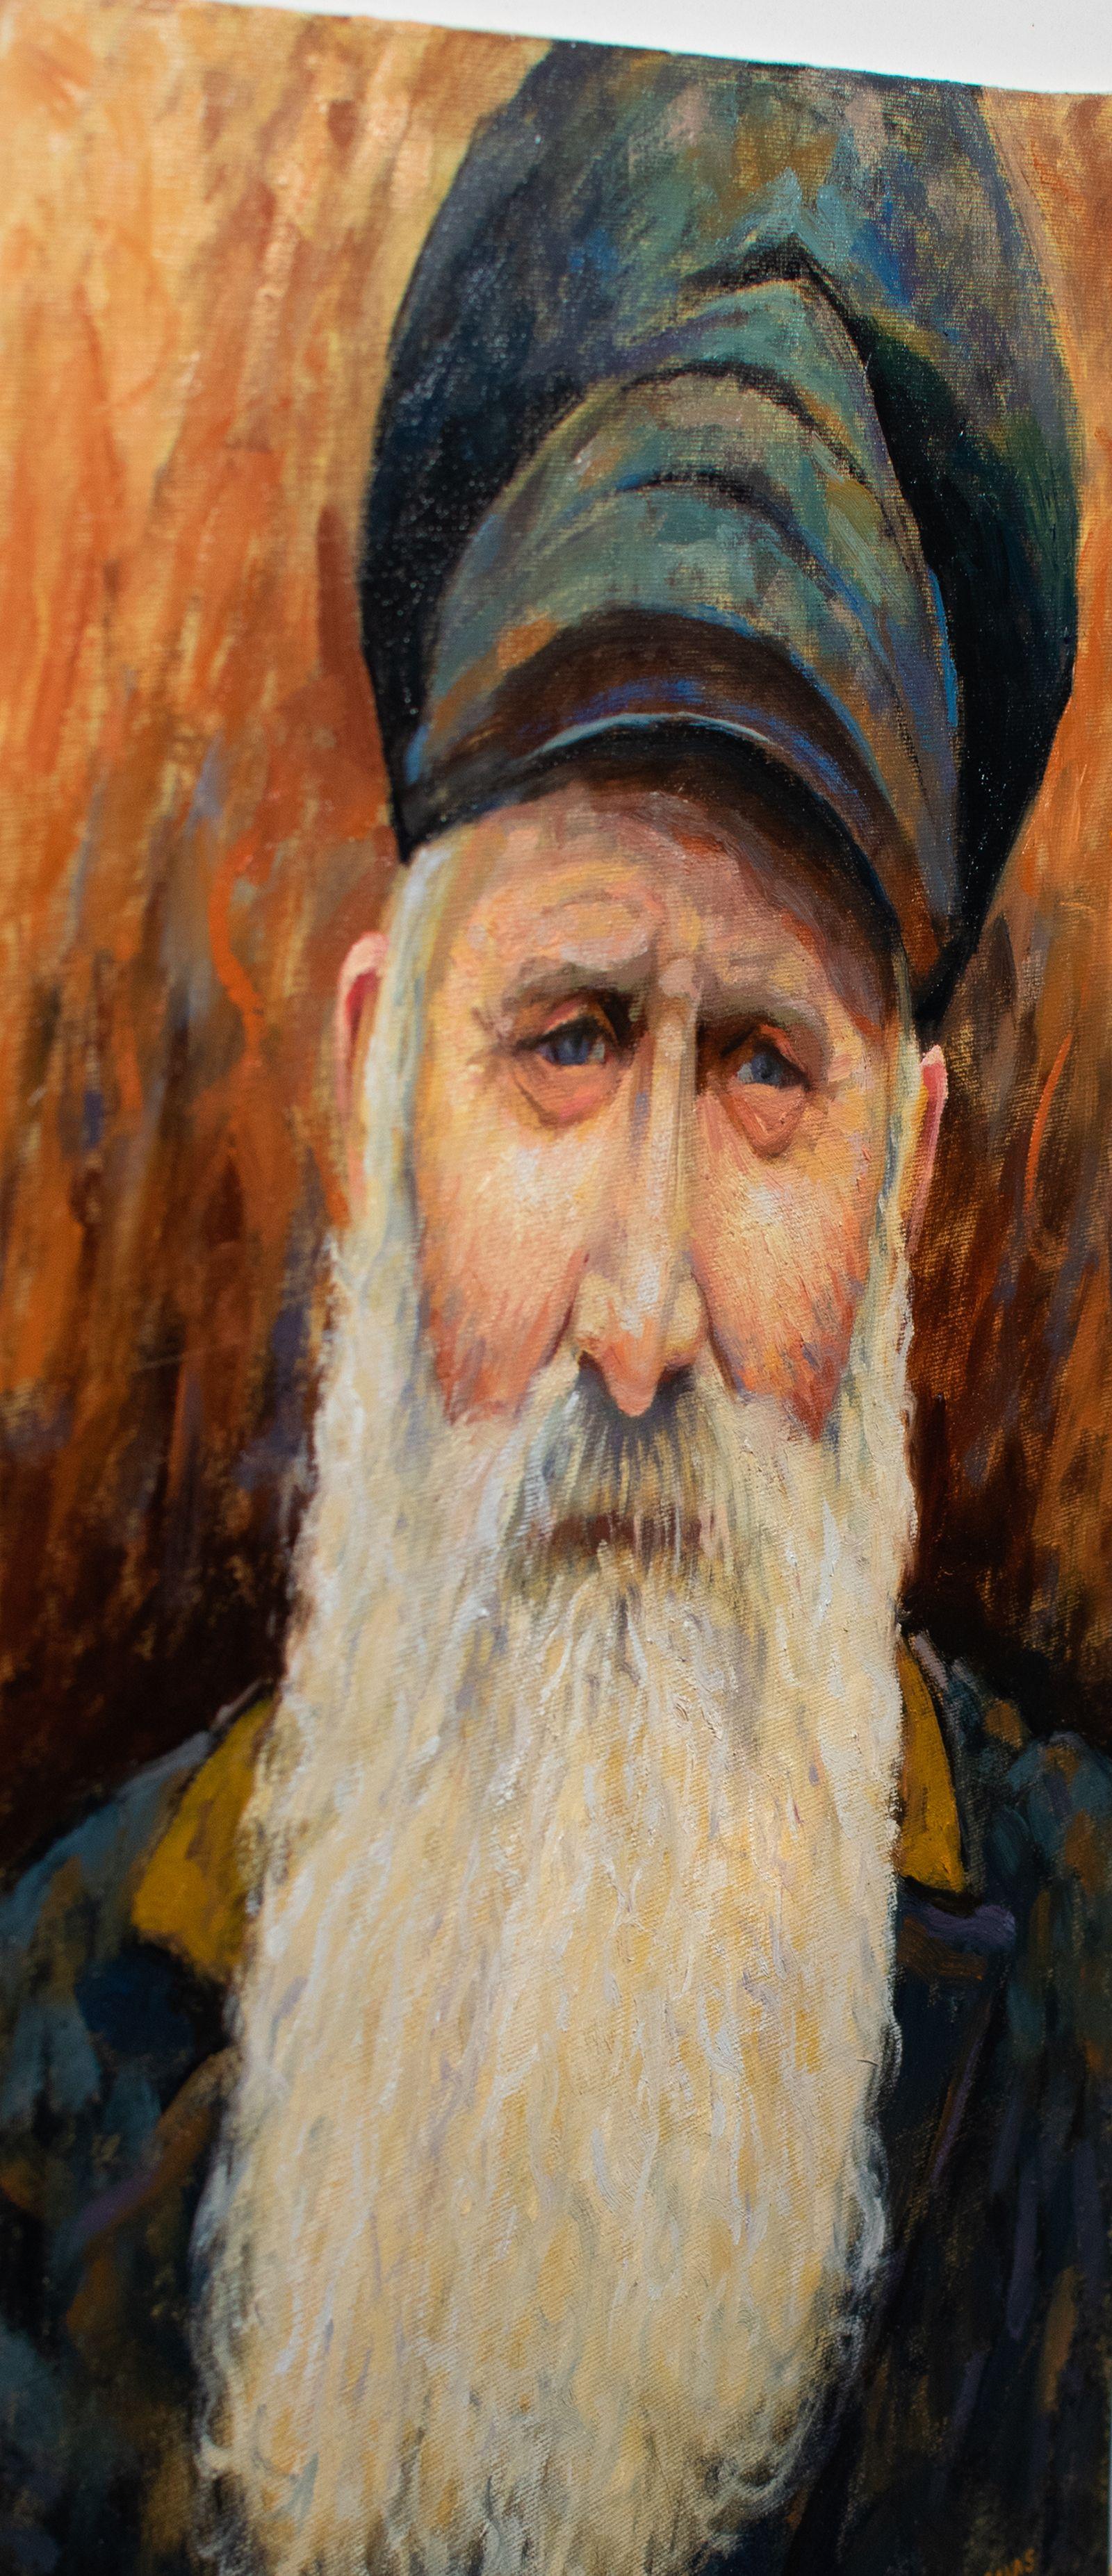 The Old Bearded Sailor, Impressionist Portrait, Painting, Oil on Canvas 2